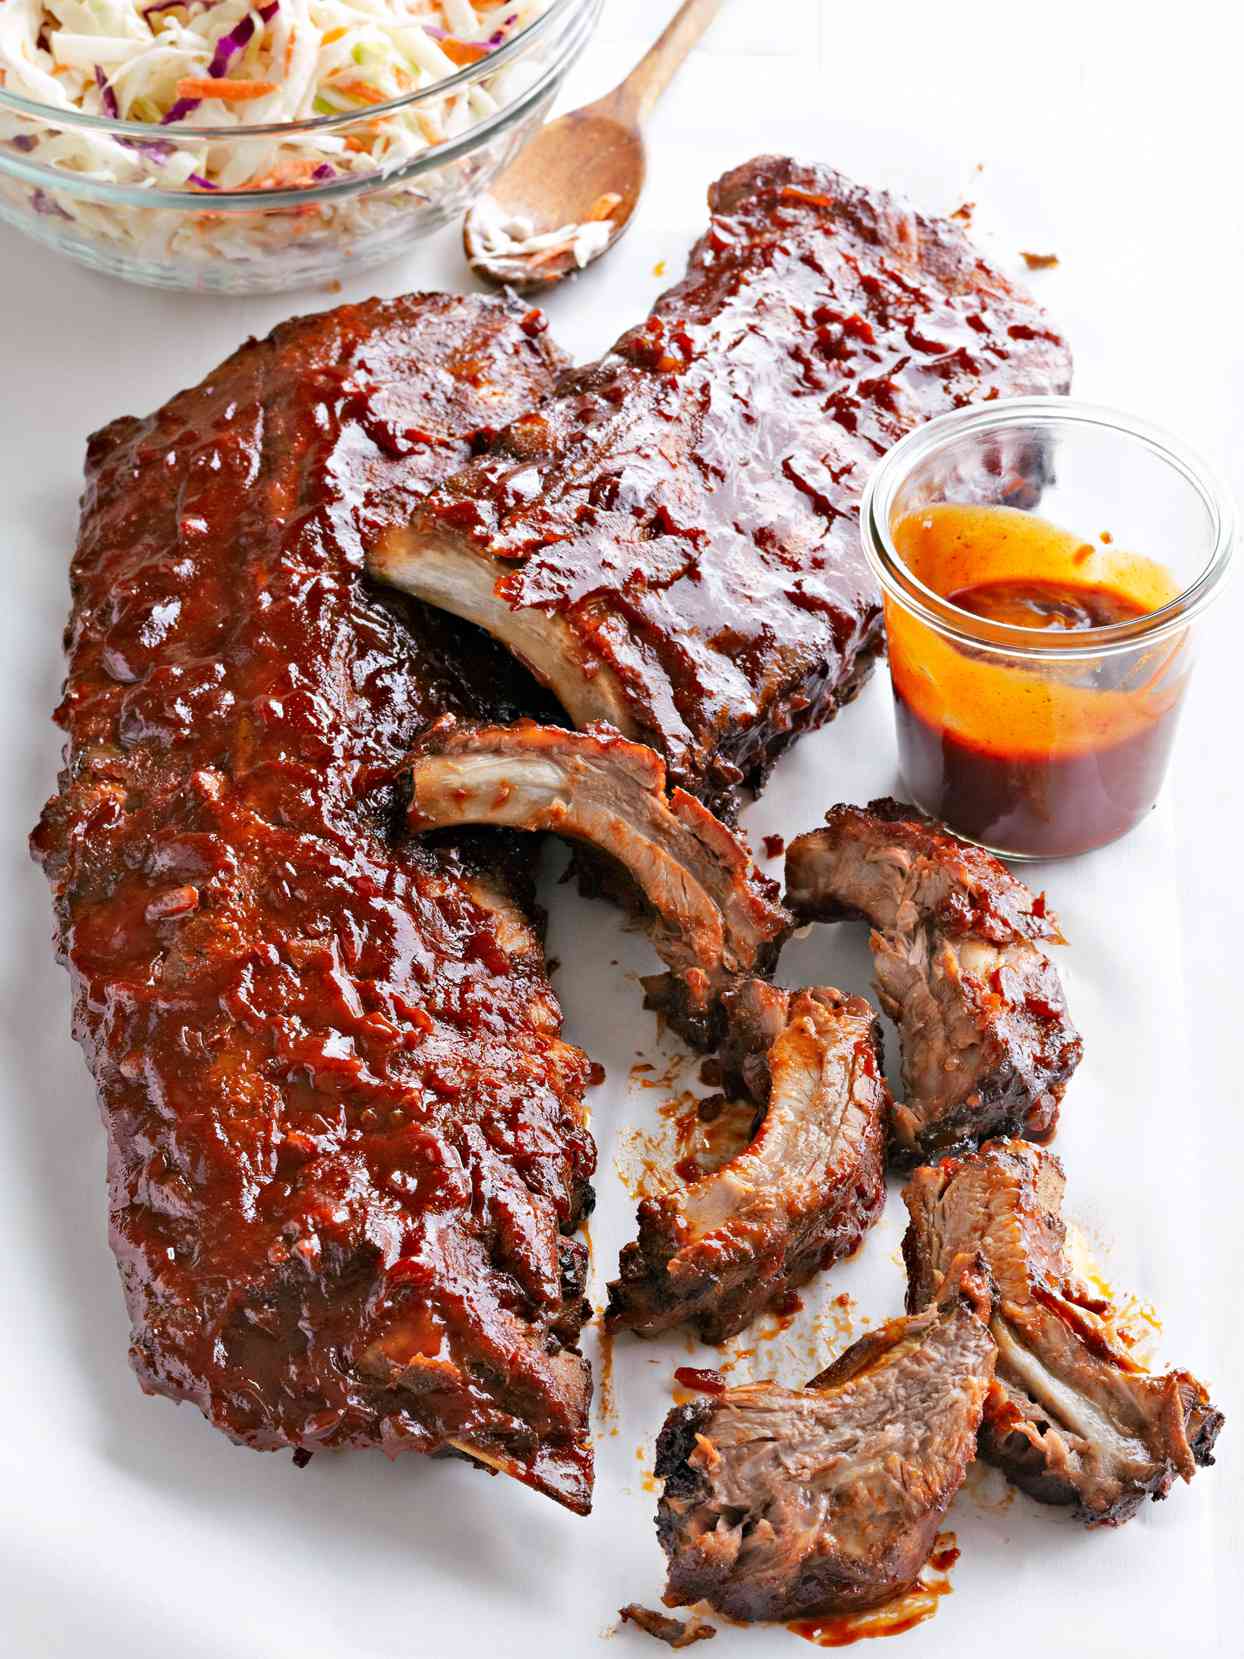 How to Cook Pork Ribs 3 Different Ways | Better Homes & Gardens